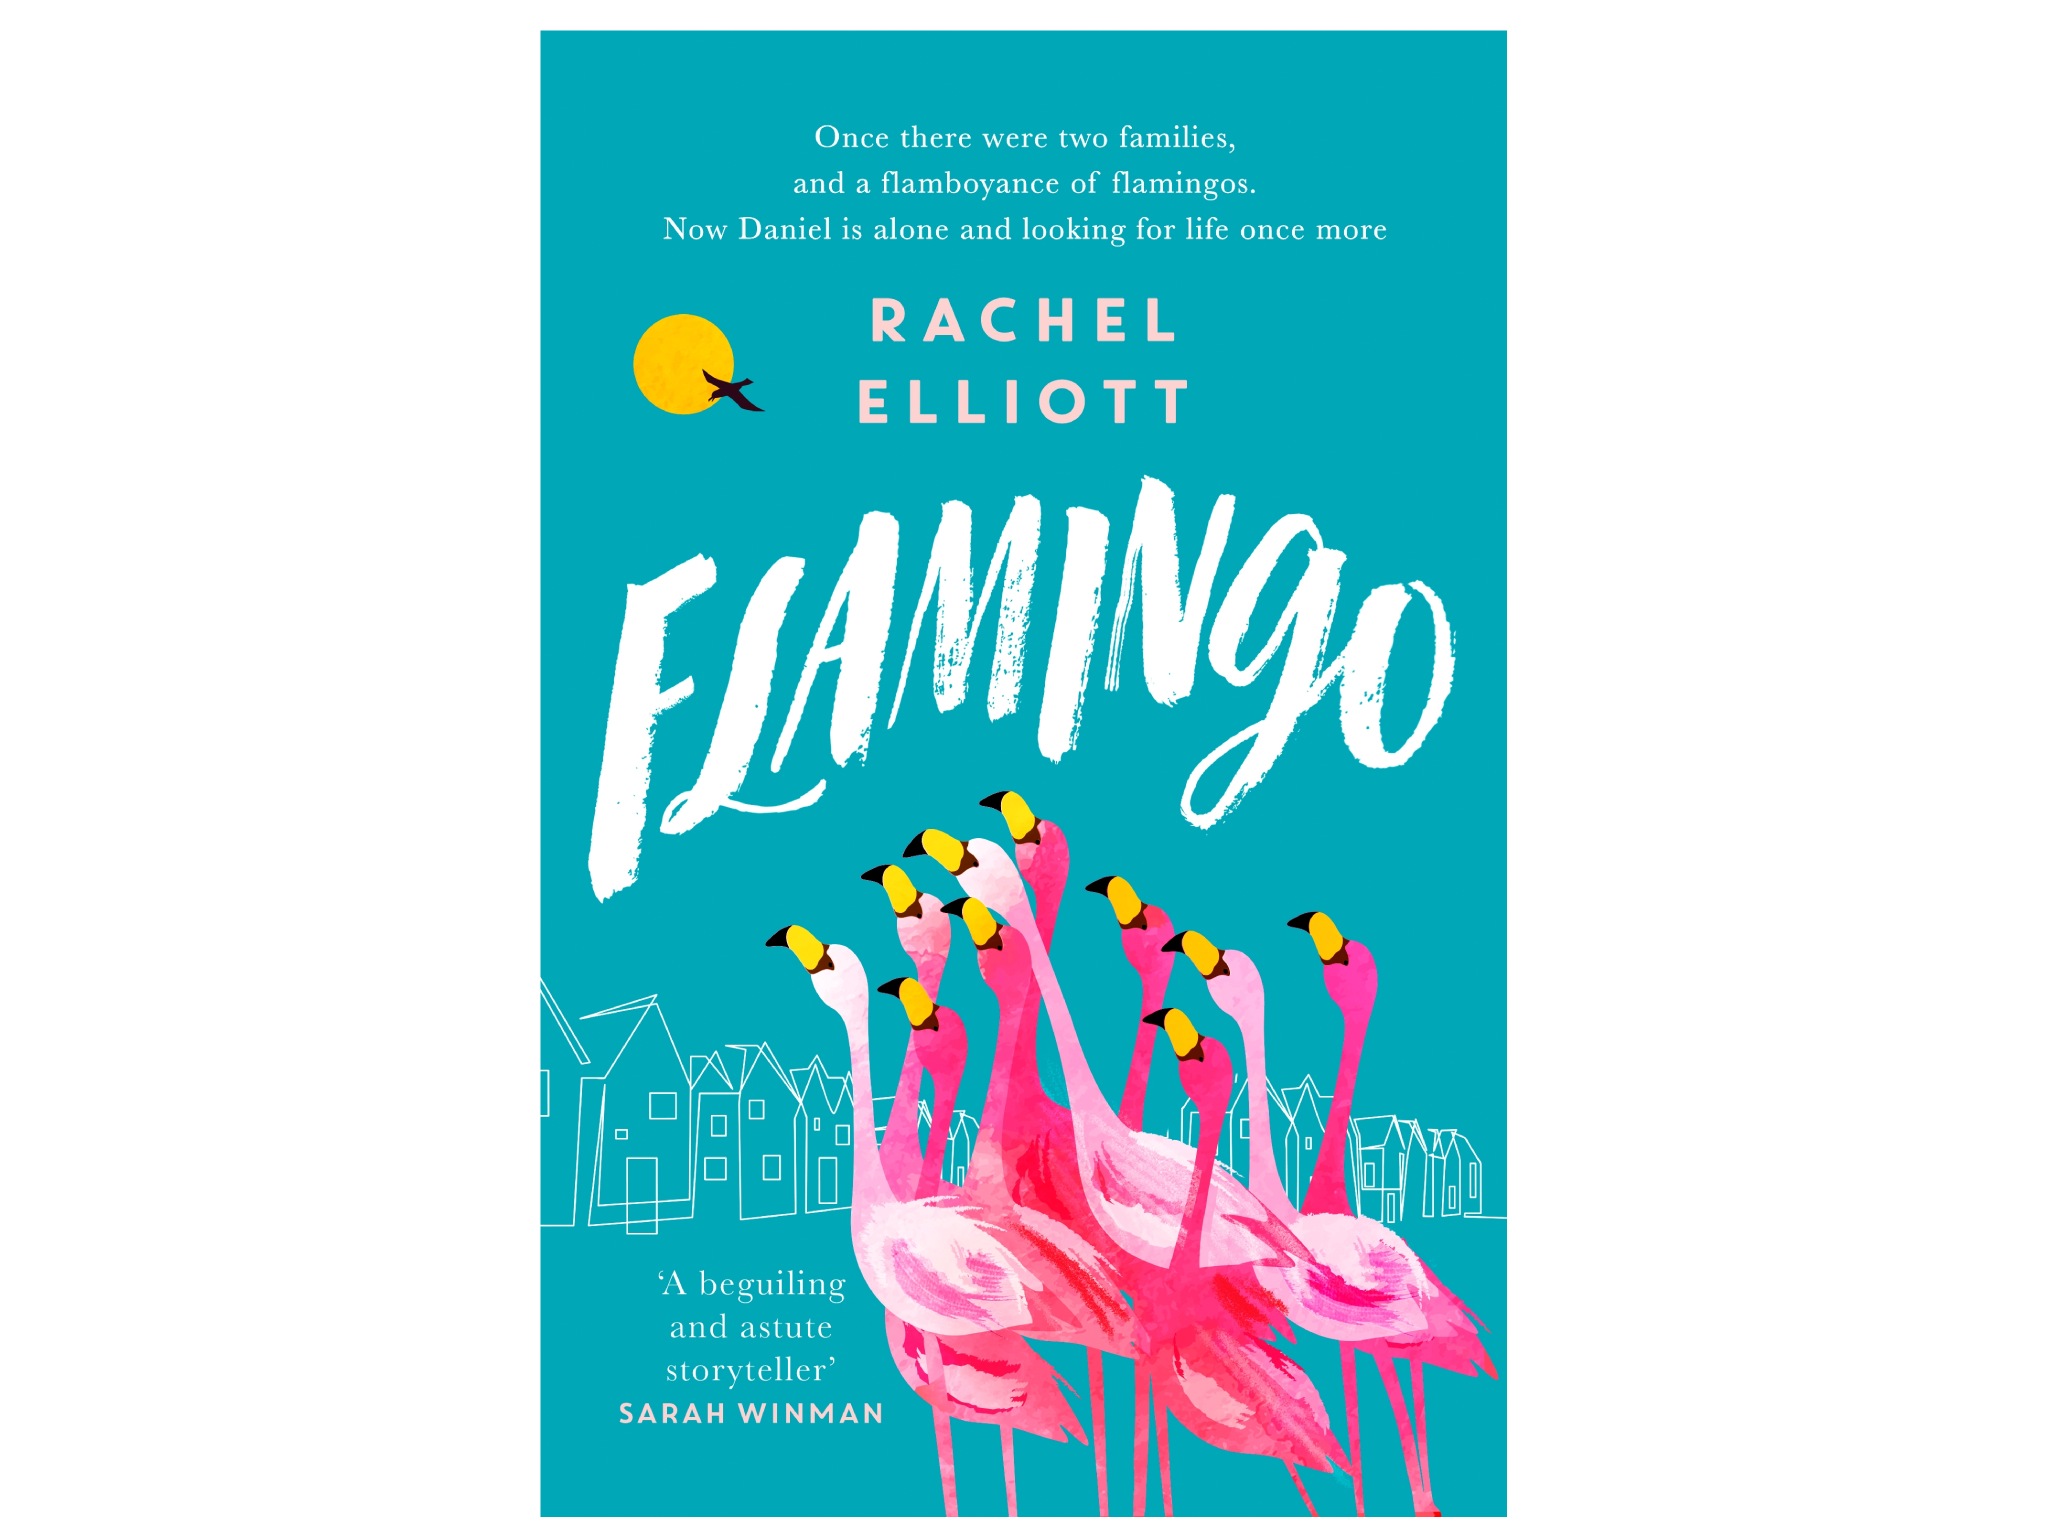 Flamingo-womens-prize-for-fiction-longlist-indybest